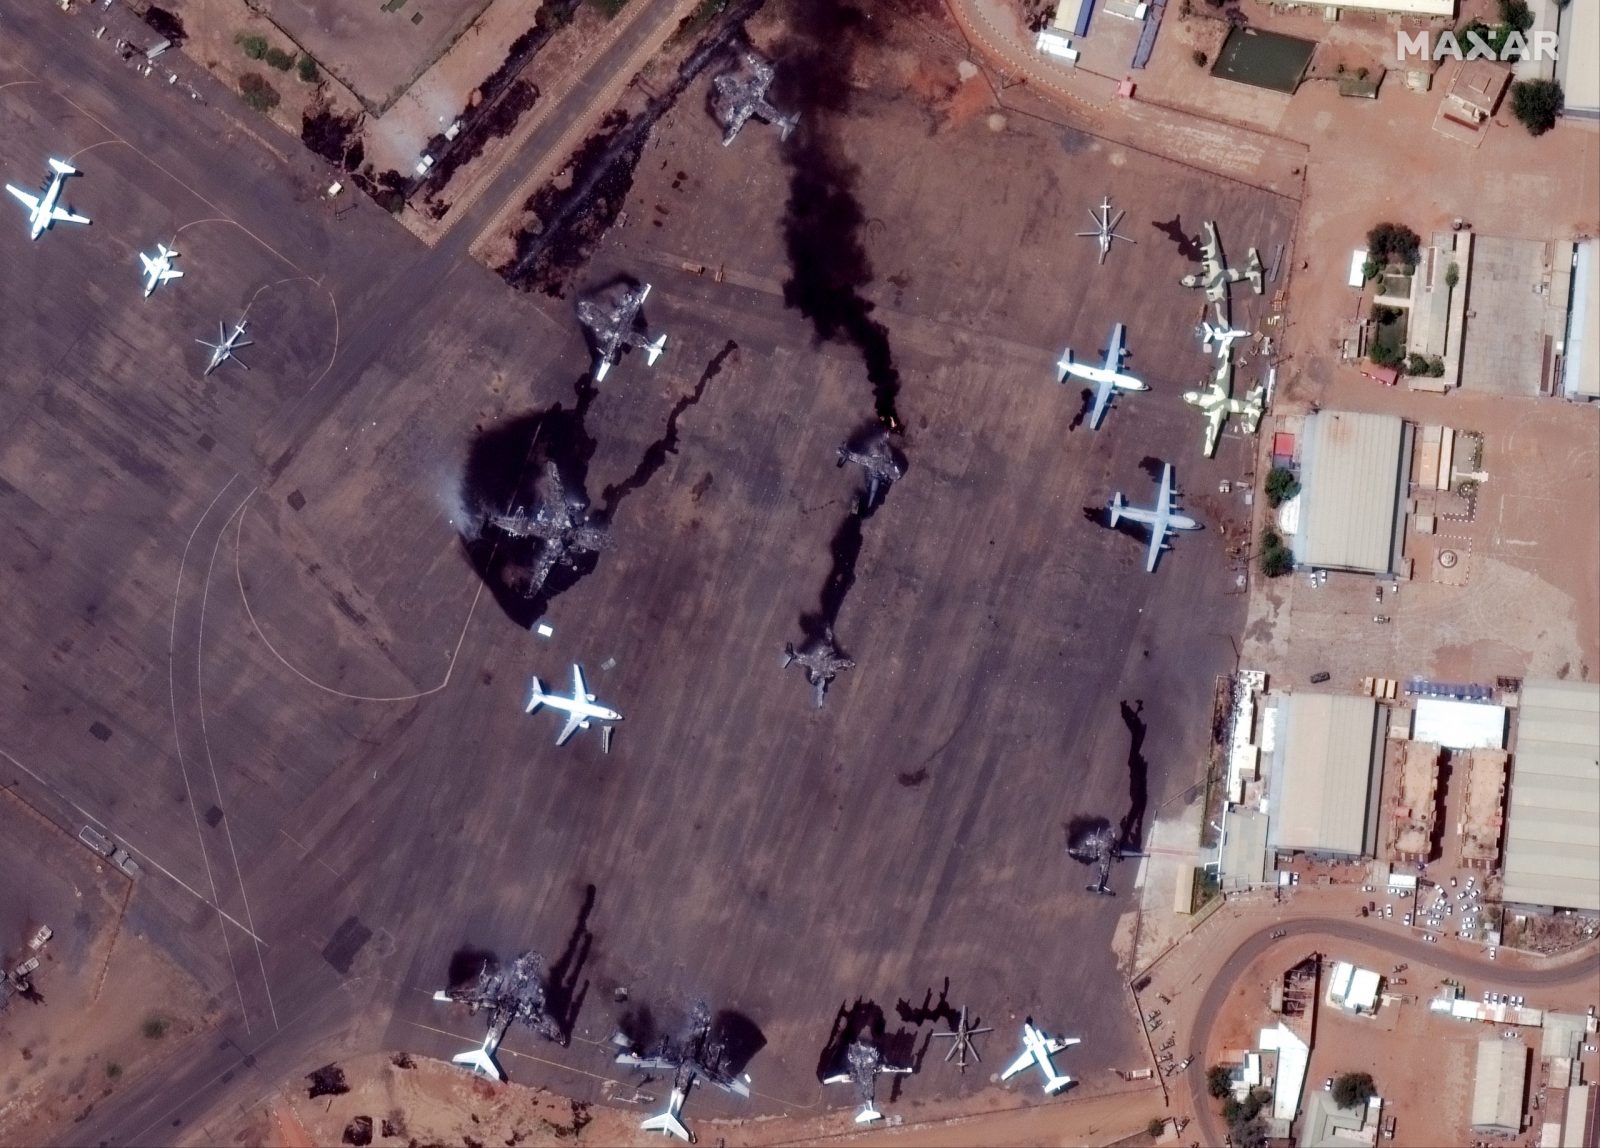 epa10577398 A handout satellite image made available by Maxar Technologies shows smoke billowing from destroyed aircrafts at Khartoum International Airport, in Khartoum, Sudan, 17 April 2023. Heavy gunfire and explosions were reported in Sudan's capital Khartoum since 15 April between the army and a paramilitary group following days of tension centering around the country's proposed transition to civilian rule.  EPA/MAXAR TECHNOLOGIES HANDOUT -- MANDATORY CREDIT: SATELLITE IMAGE 2023 MAXAR TECHNOLOGIES -- THE WATERMARK MAY NOT BE REMOVED/CROPPED -- HANDOUT EDITORIAL USE ONLY/NO SALES